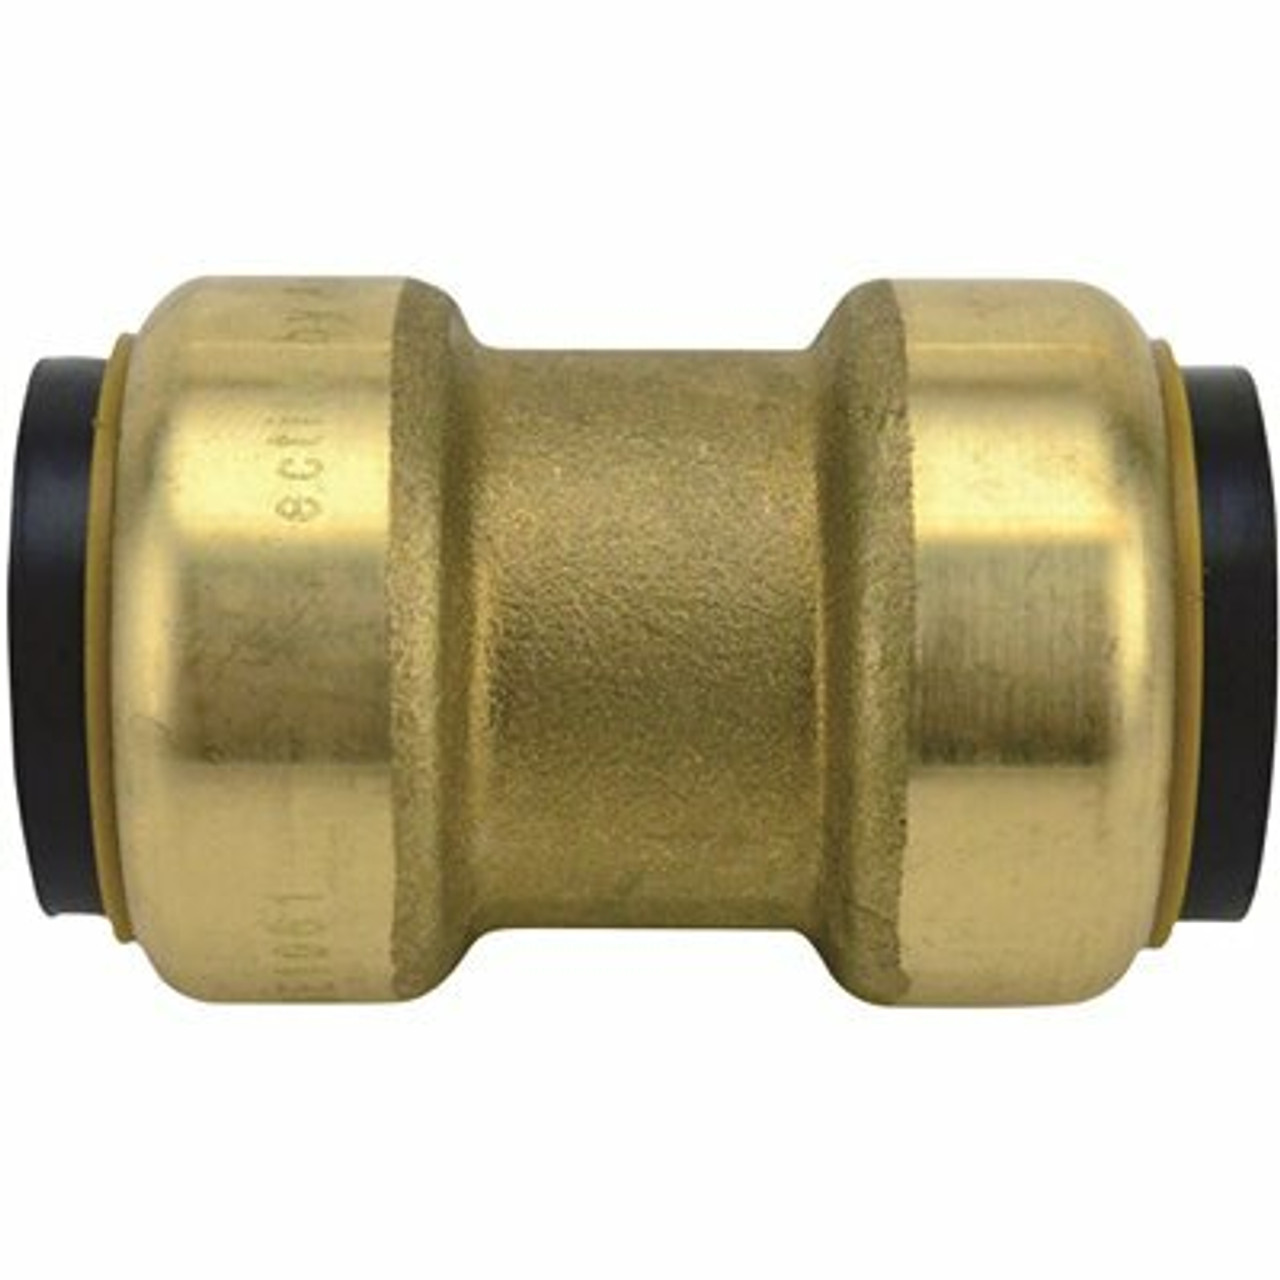 Tectite 1 In. Brass Push-To-Connect Coupling